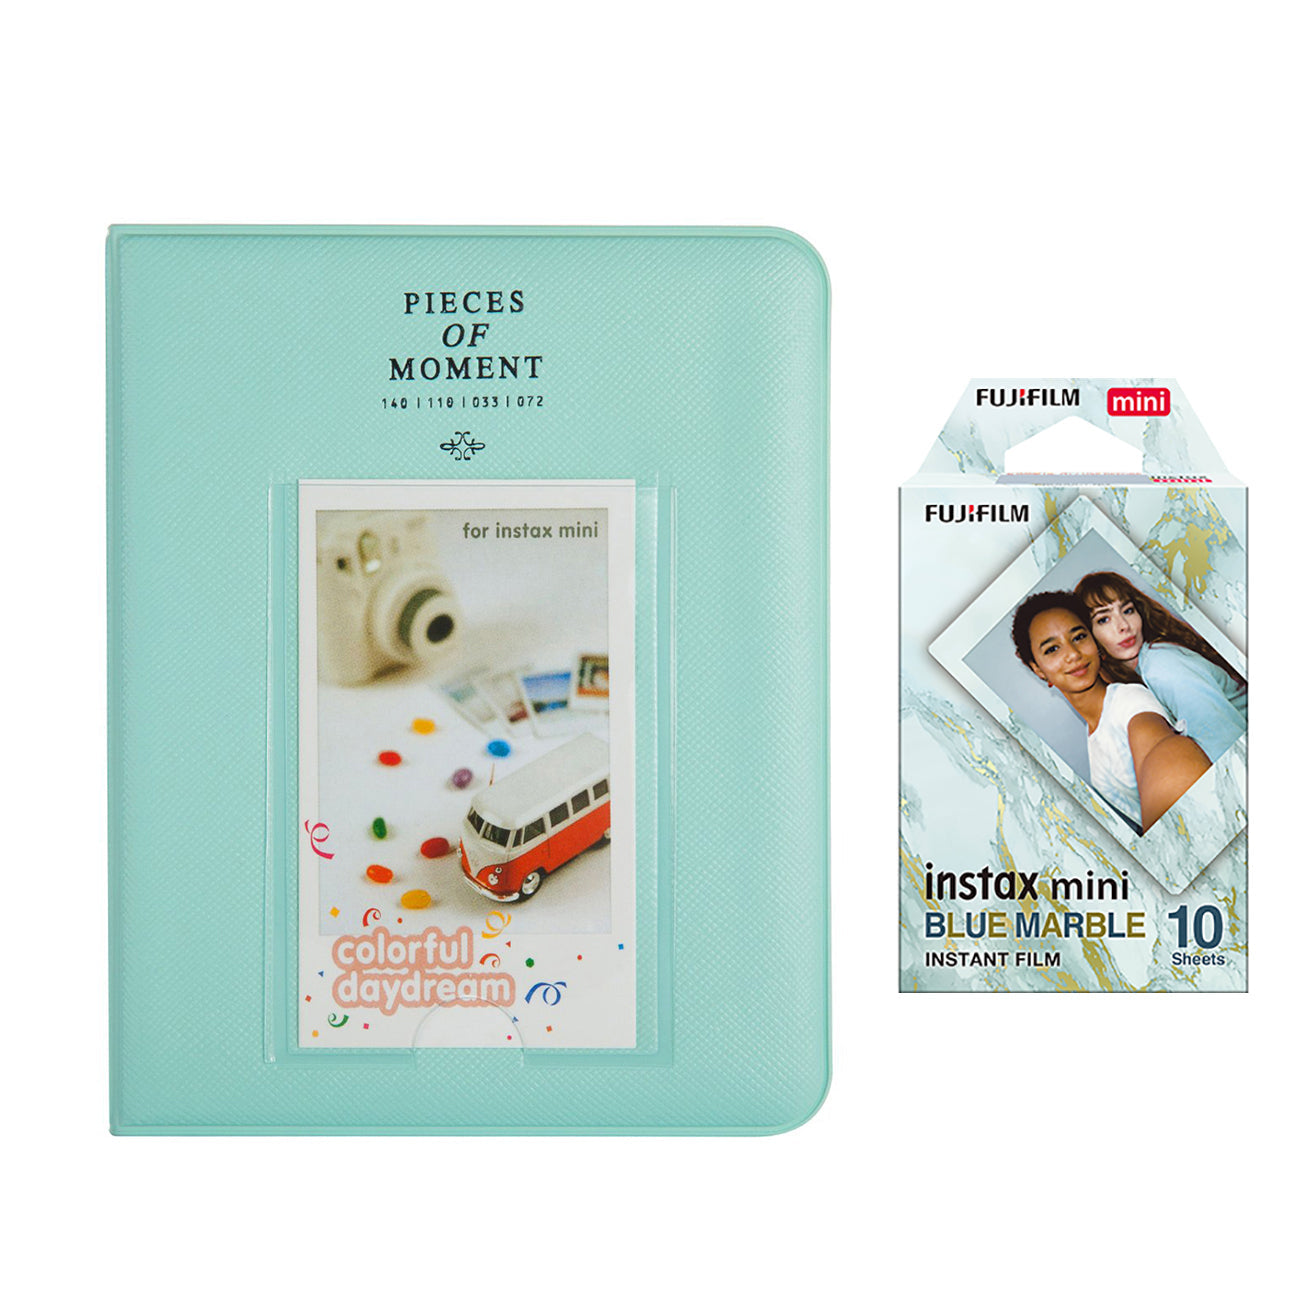 Fujifilm Instax Mini 10X1 blue marble Instant Film with Instax Time Photo Album 64 Sheets (ice blue)